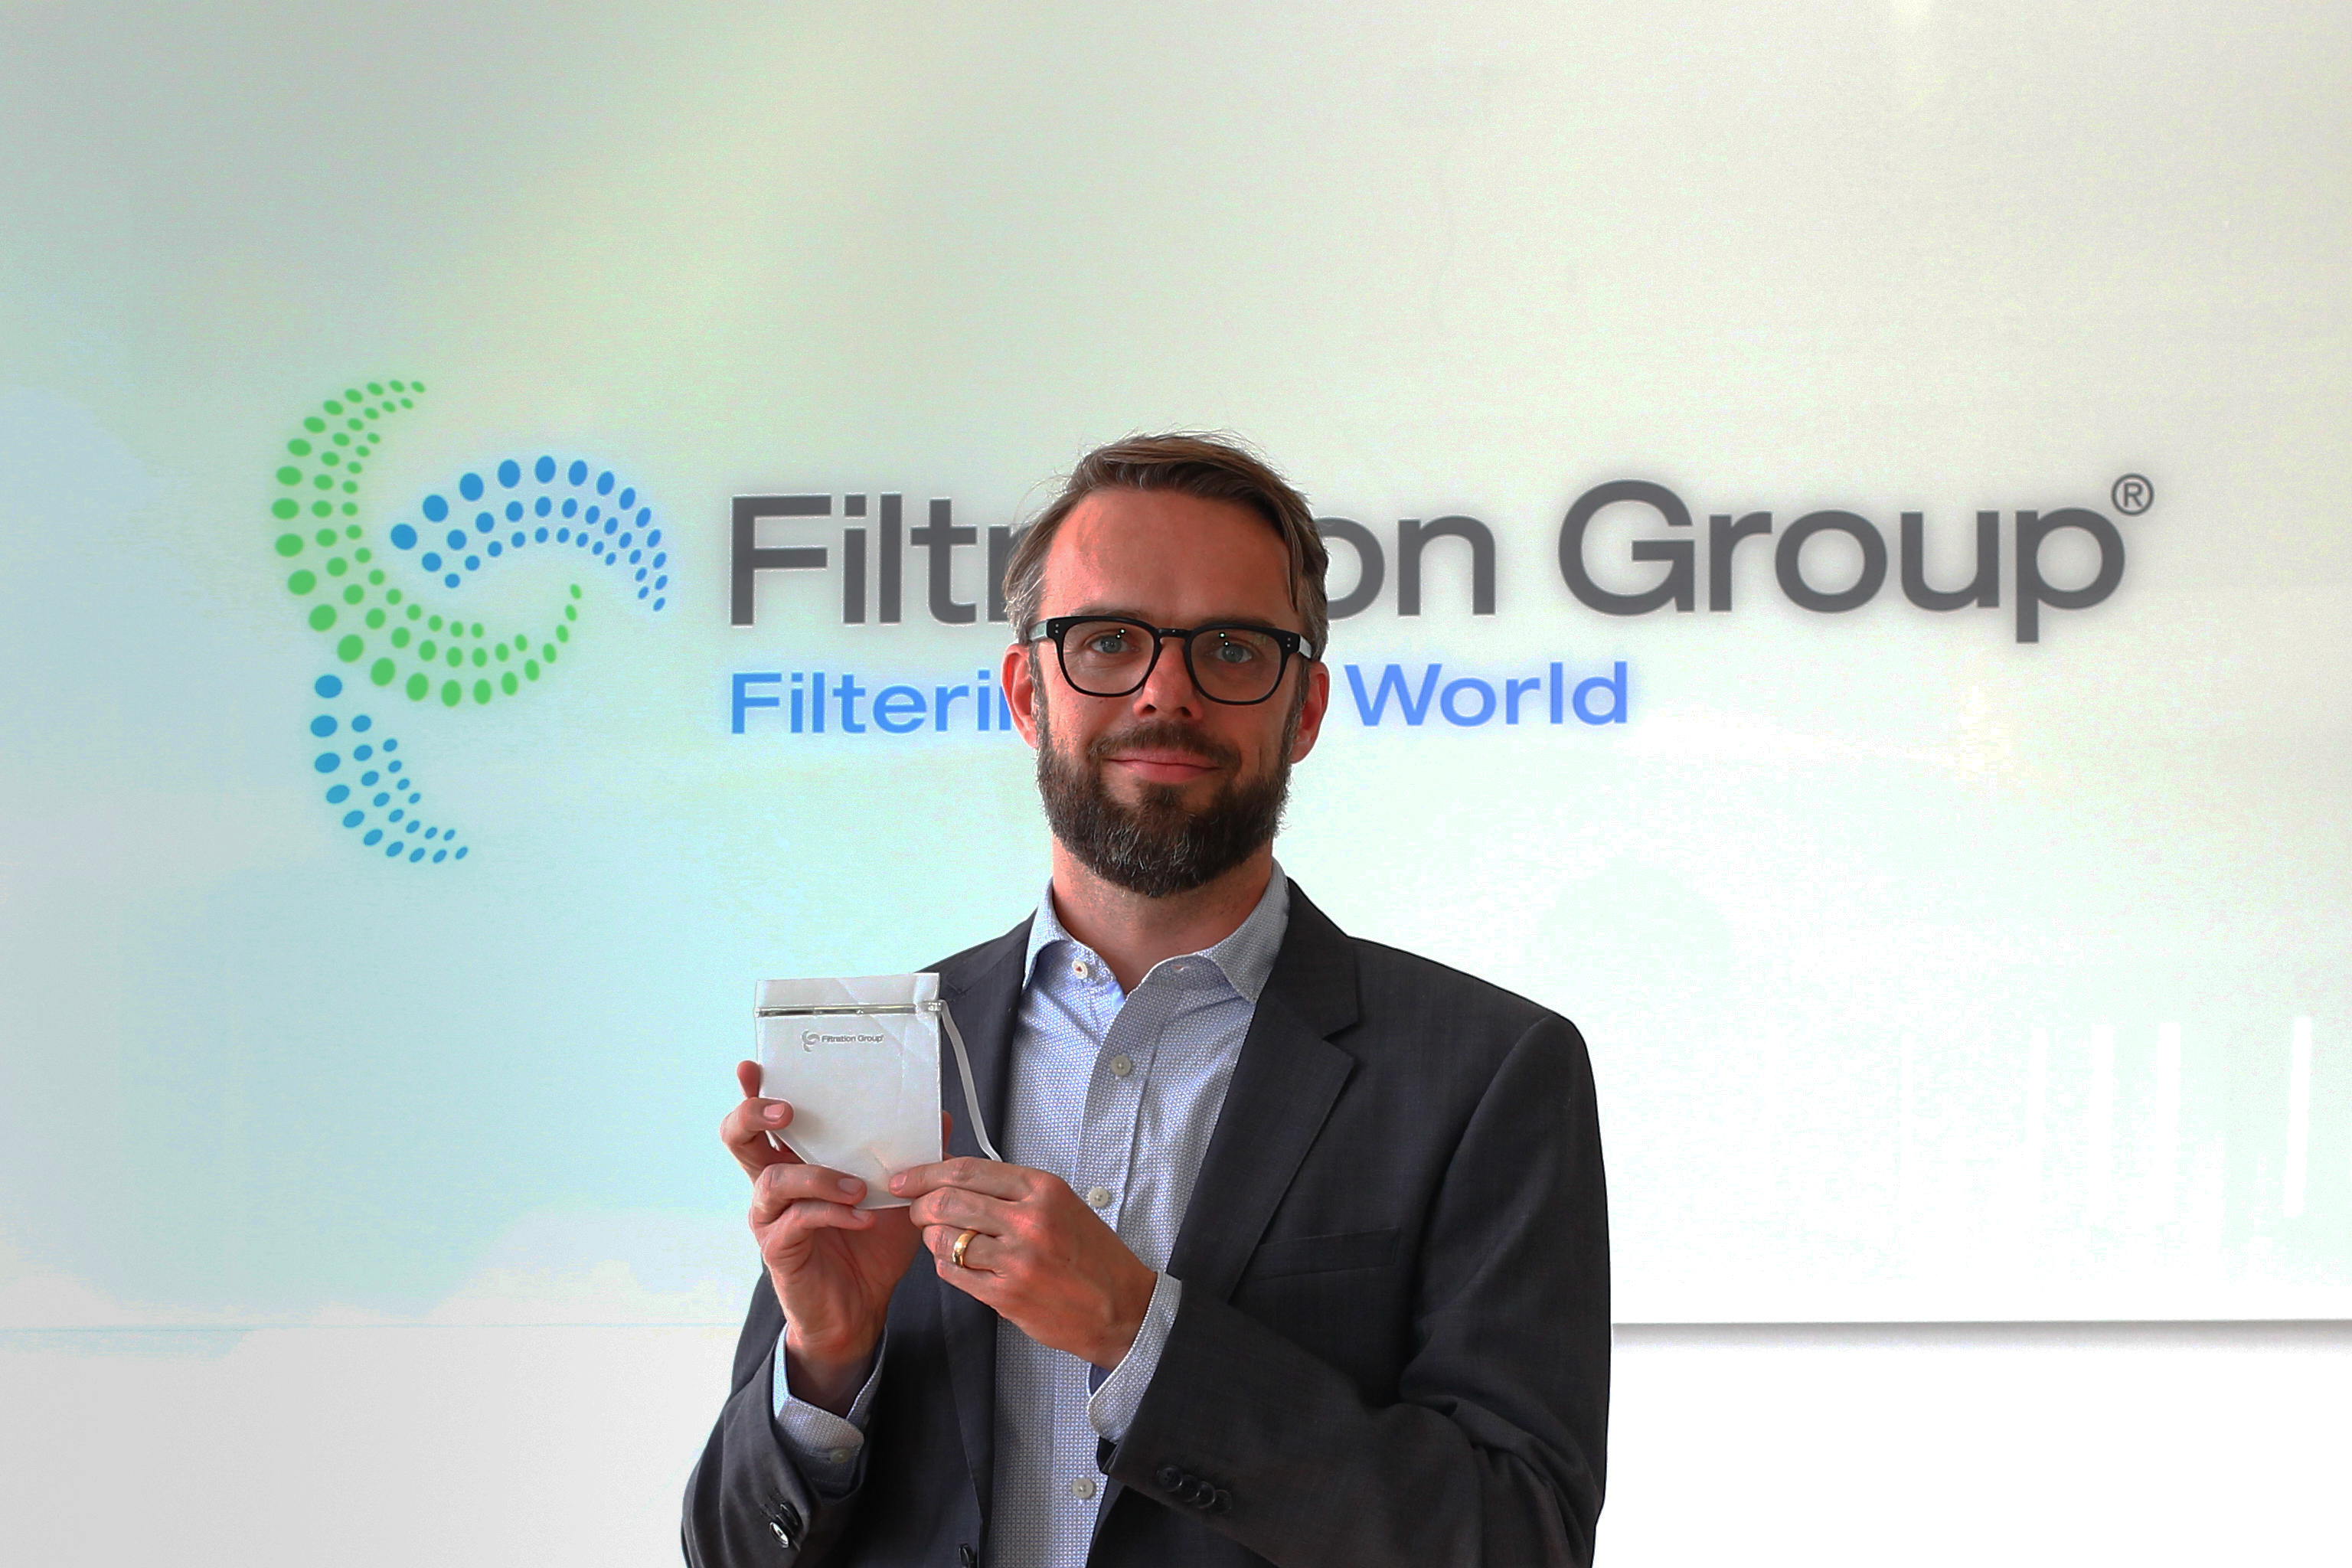 Gunnar Halden, president of Filtration Group Industrial, with a prototype of the face mask. Image copyright Filtration Group GmbH.